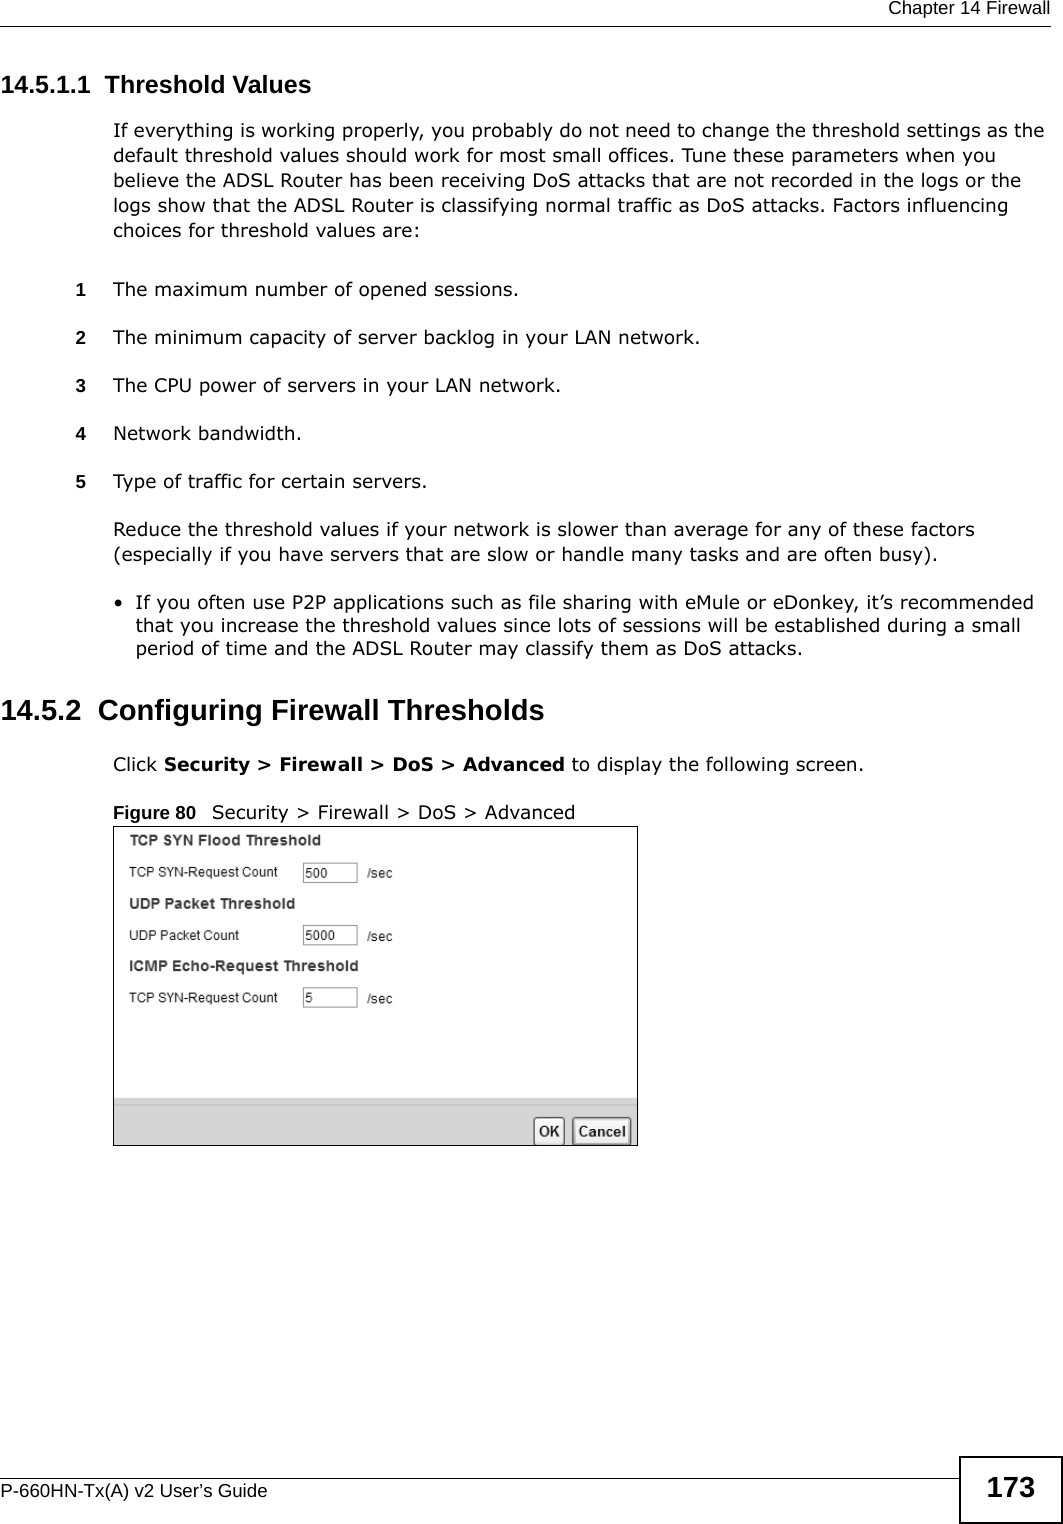  Chapter 14 FirewallP-660HN-Tx(A) v2 User’s Guide 17314.5.1.1  Threshold ValuesIf everything is working properly, you probably do not need to change the threshold settings as the default threshold values should work for most small offices. Tune these parameters when you believe the ADSL Router has been receiving DoS attacks that are not recorded in the logs or the logs show that the ADSL Router is classifying normal traffic as DoS attacks. Factors influencing choices for threshold values are:1The maximum number of opened sessions.2The minimum capacity of server backlog in your LAN network.3The CPU power of servers in your LAN network.4Network bandwidth. 5Type of traffic for certain servers.Reduce the threshold values if your network is slower than average for any of these factors (especially if you have servers that are slow or handle many tasks and are often busy). • If you often use P2P applications such as file sharing with eMule or eDonkey, it’s recommended that you increase the threshold values since lots of sessions will be established during a small period of time and the ADSL Router may classify them as DoS attacks. 14.5.2  Configuring Firewall ThresholdsClick Security &gt; Firewall &gt; DoS &gt; Advanced to display the following screen.Figure 80   Security &gt; Firewall &gt; DoS &gt; Advanced 